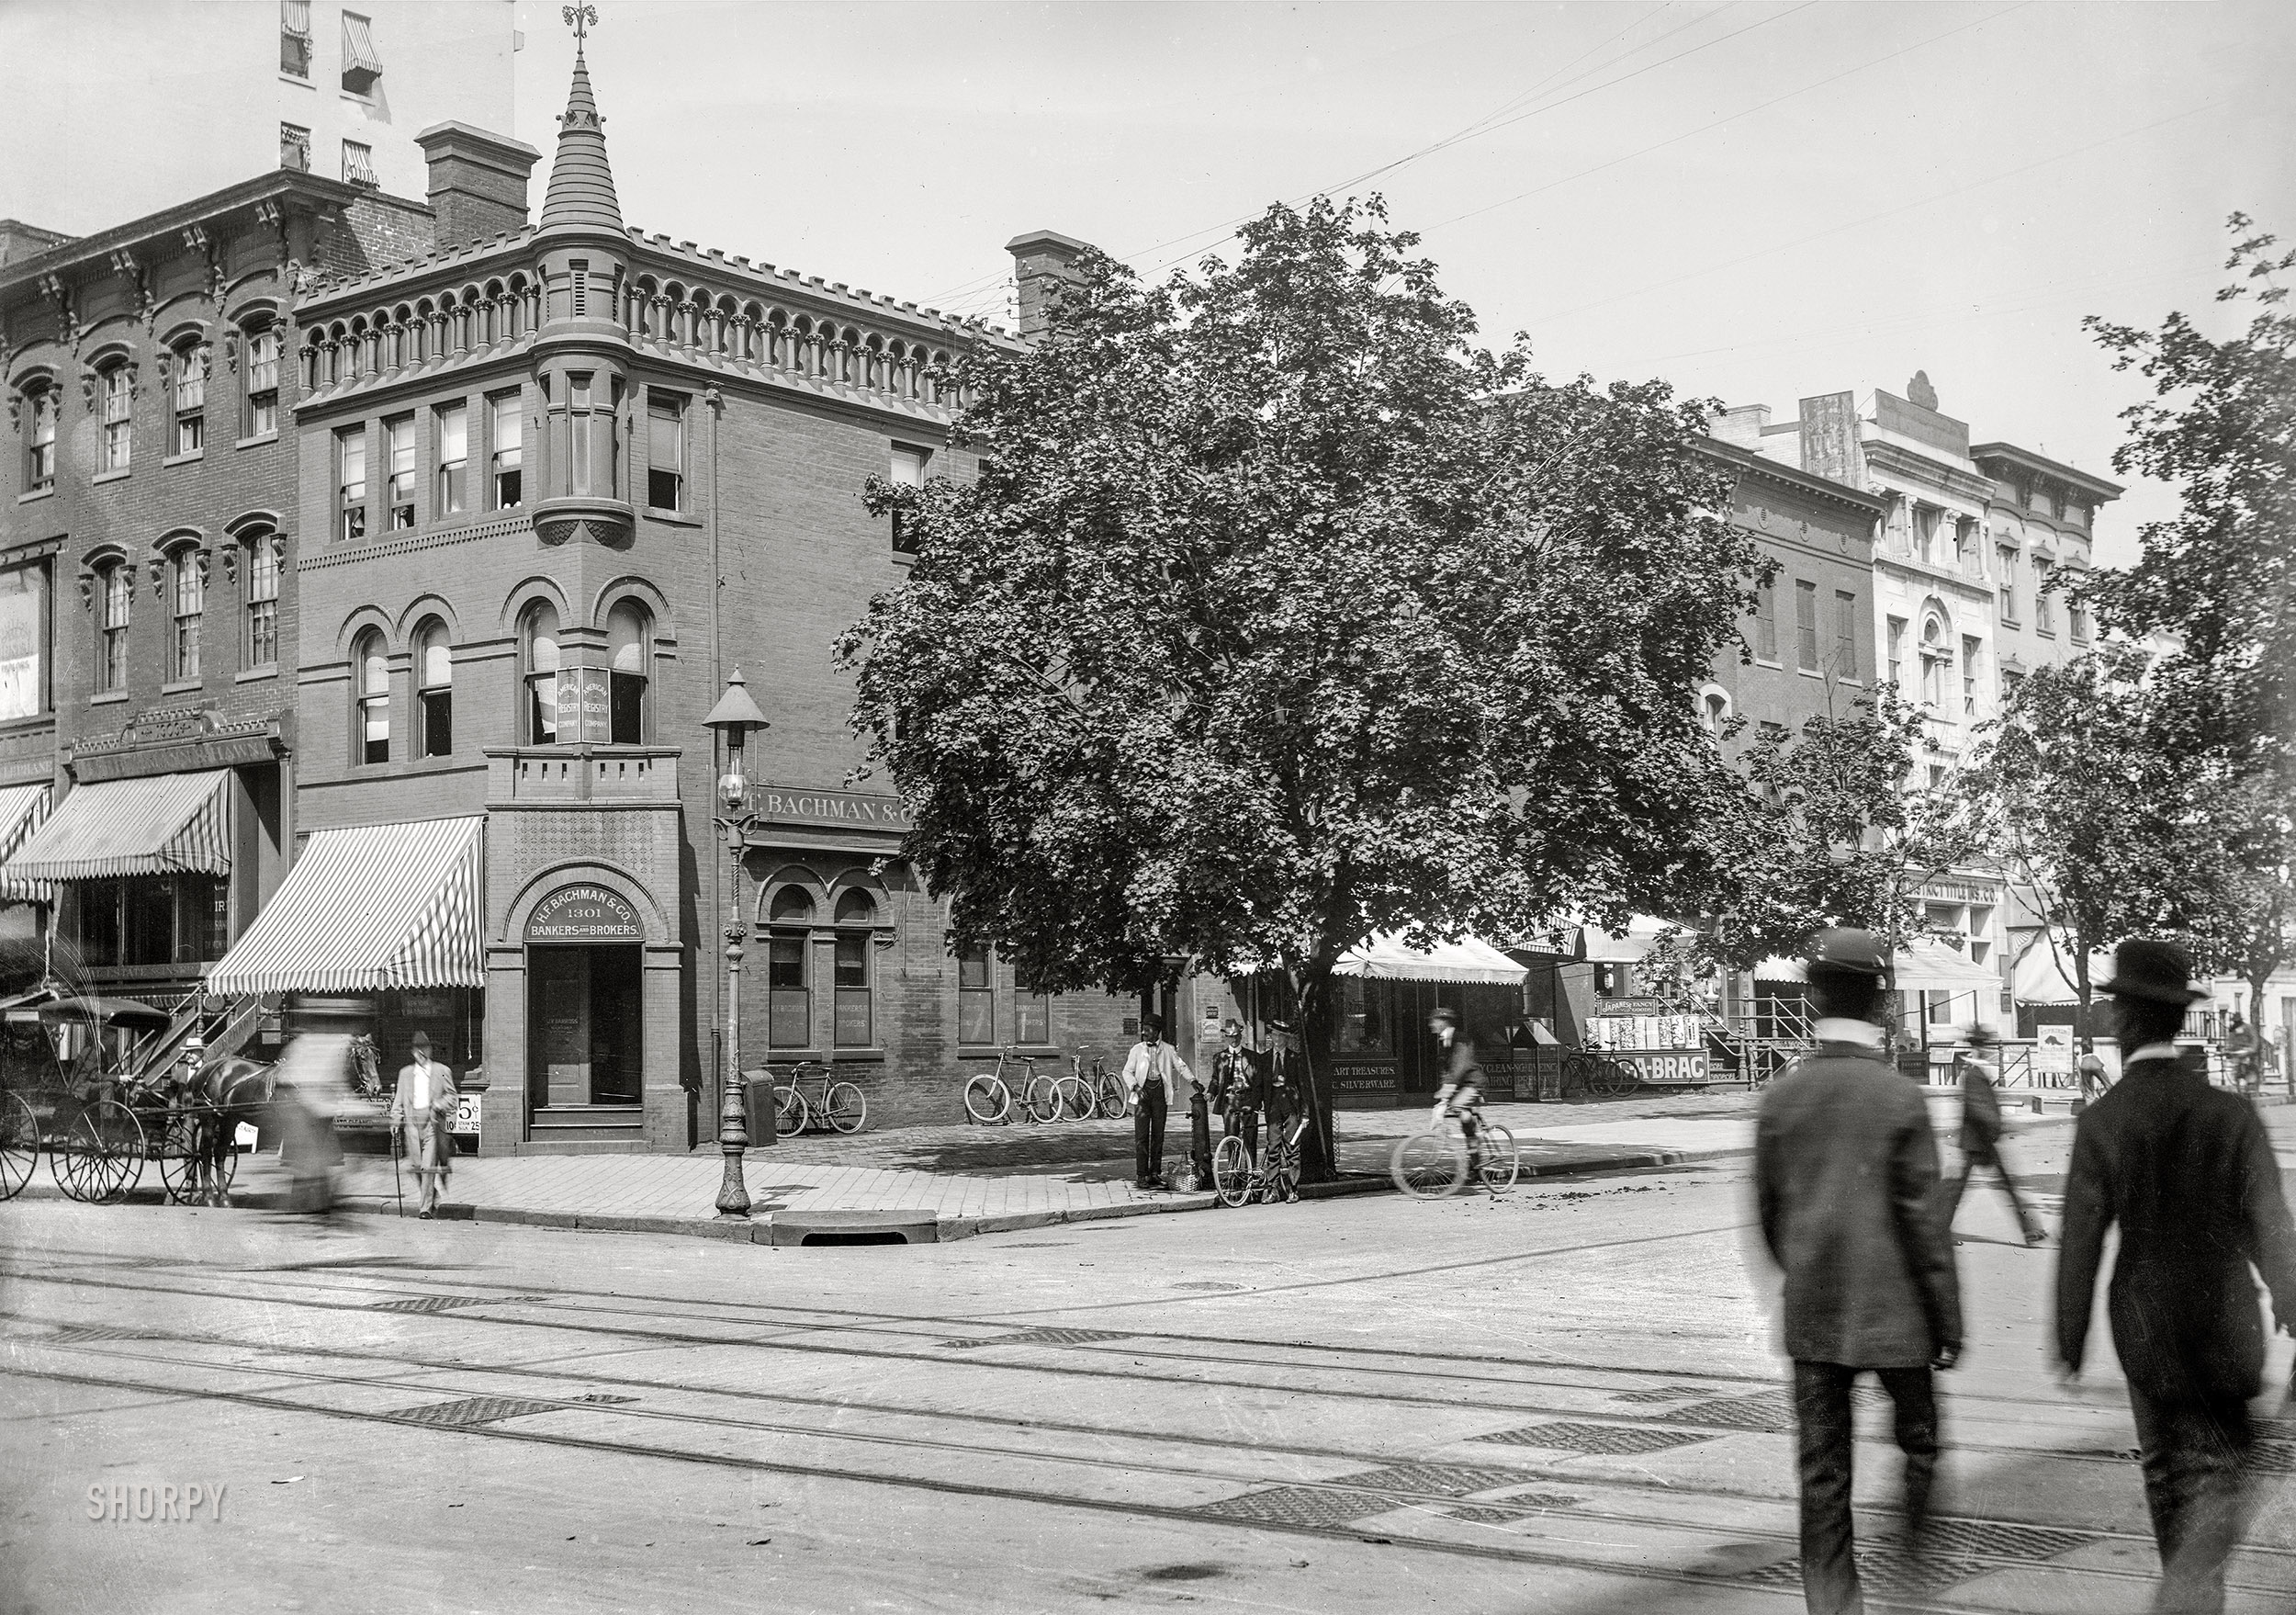 Washington, D.C., circa 1901. "View of 13th Street N.W., west side, looking north from F Street showing view of H.F. Bachman & Co. on the corner and other shops on the block." Which include a dealer in Japanese Fancy Goods and Bric-a-Brac. Also note the public water tap under the tree. 5x7 inch glass negative, D.C. Street Survey Collection. View full size.